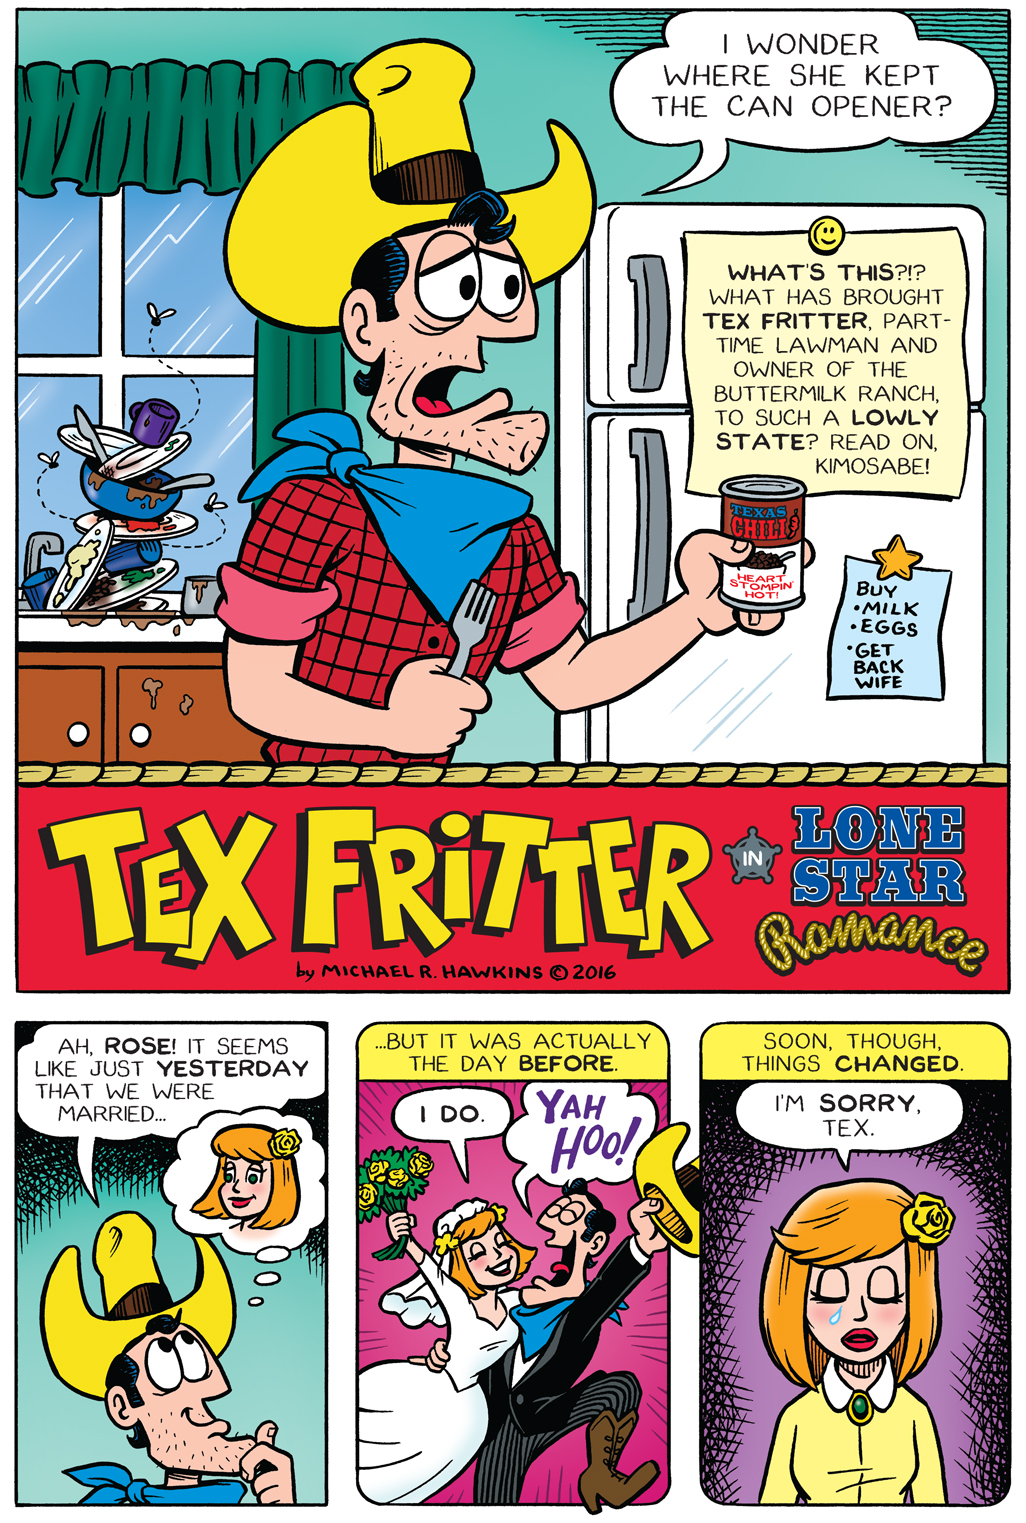 Tex Fritter Romance Page 1